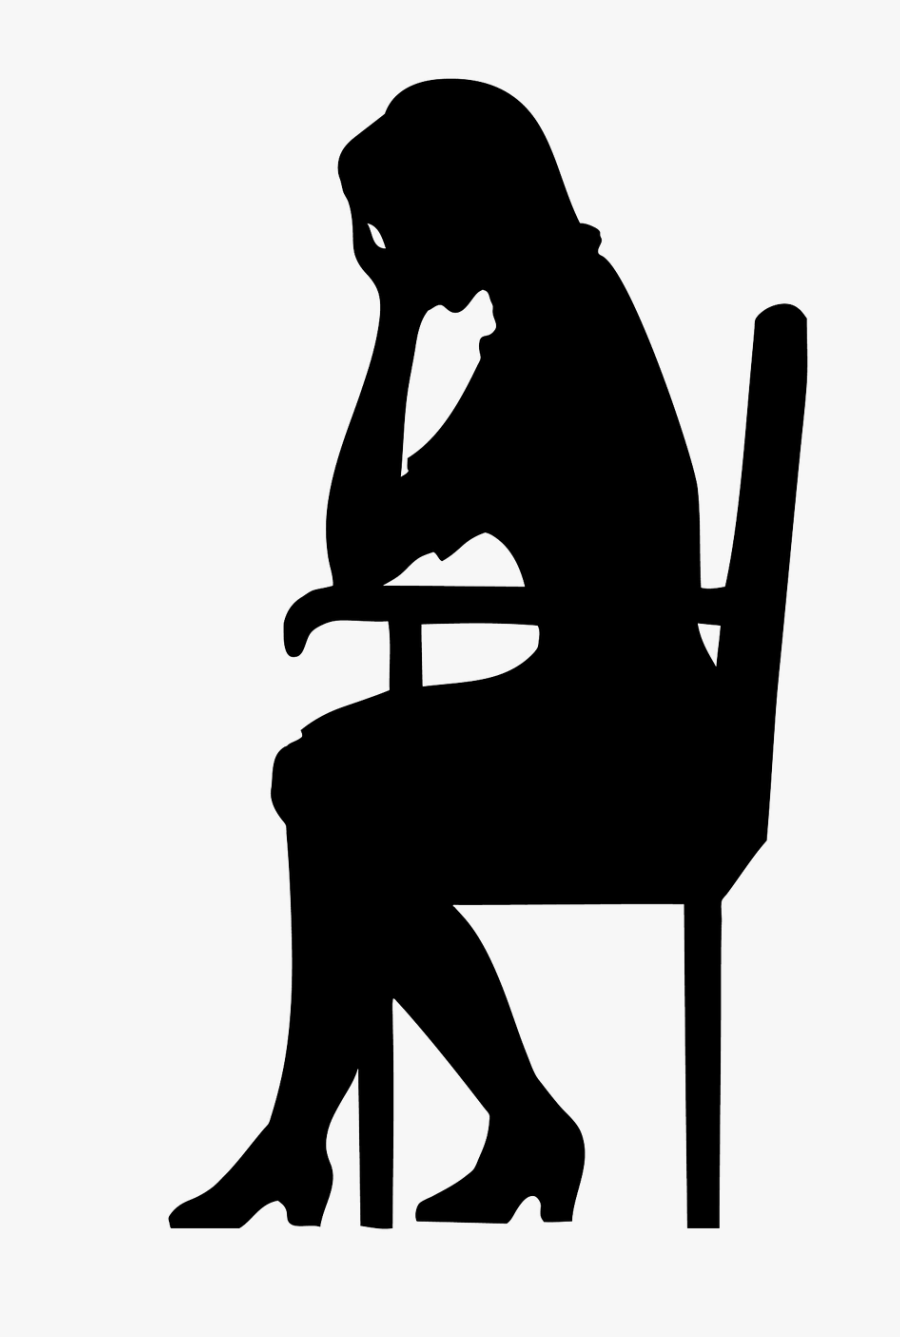 Thoughts Of A Woman Revealed - Depressed Woman Silhouette Png, Transparent Clipart